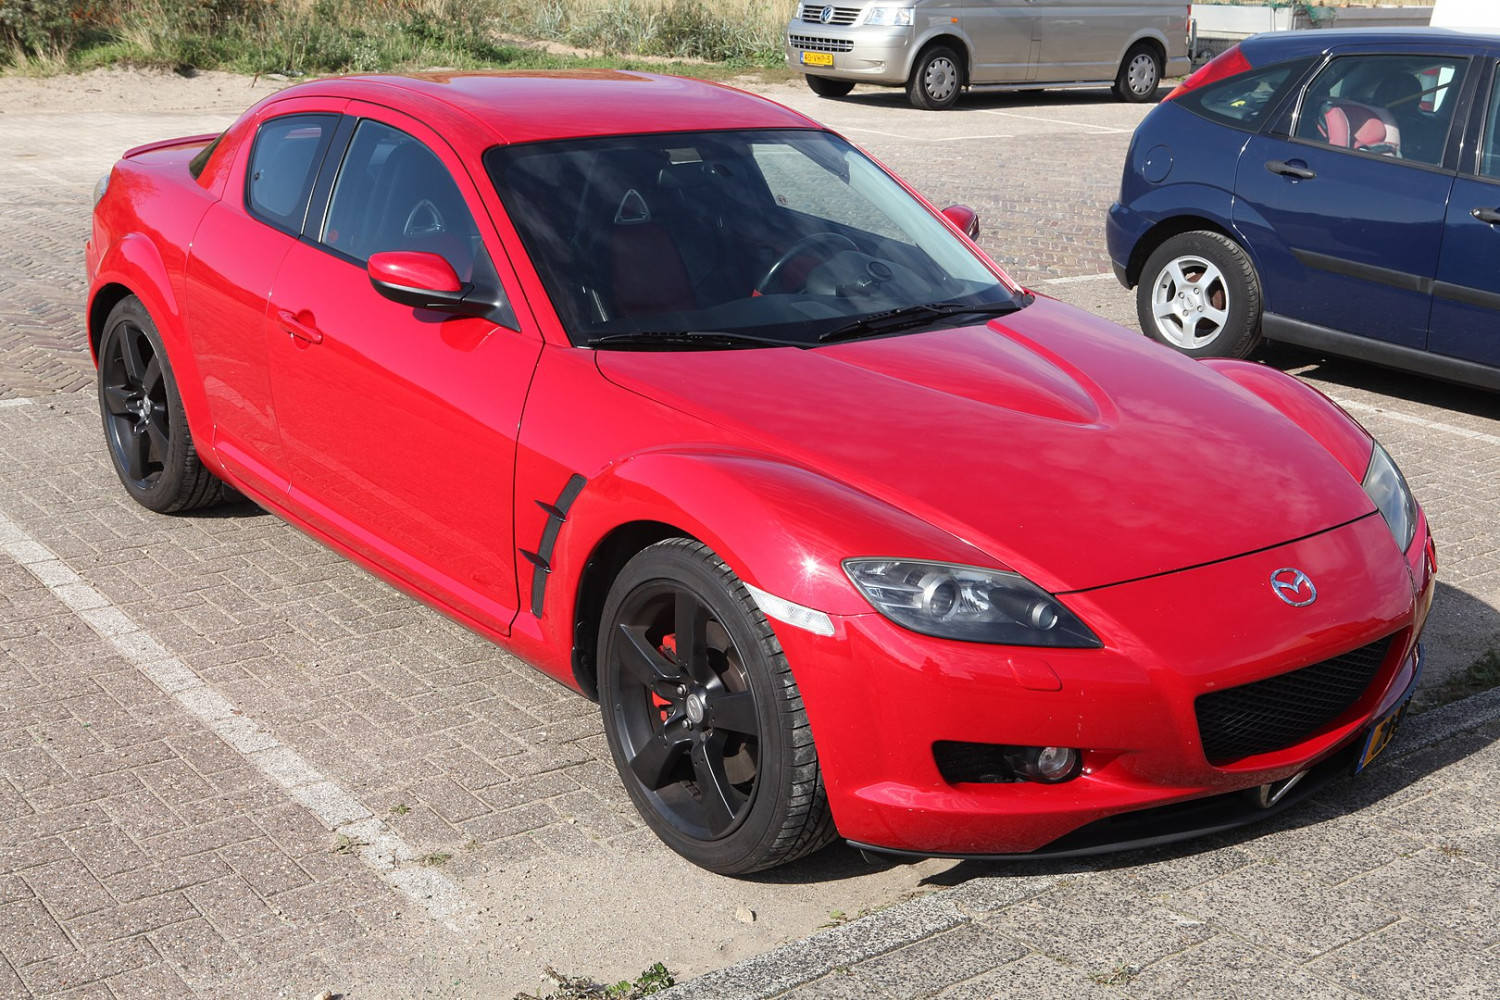 Example of a RX-8